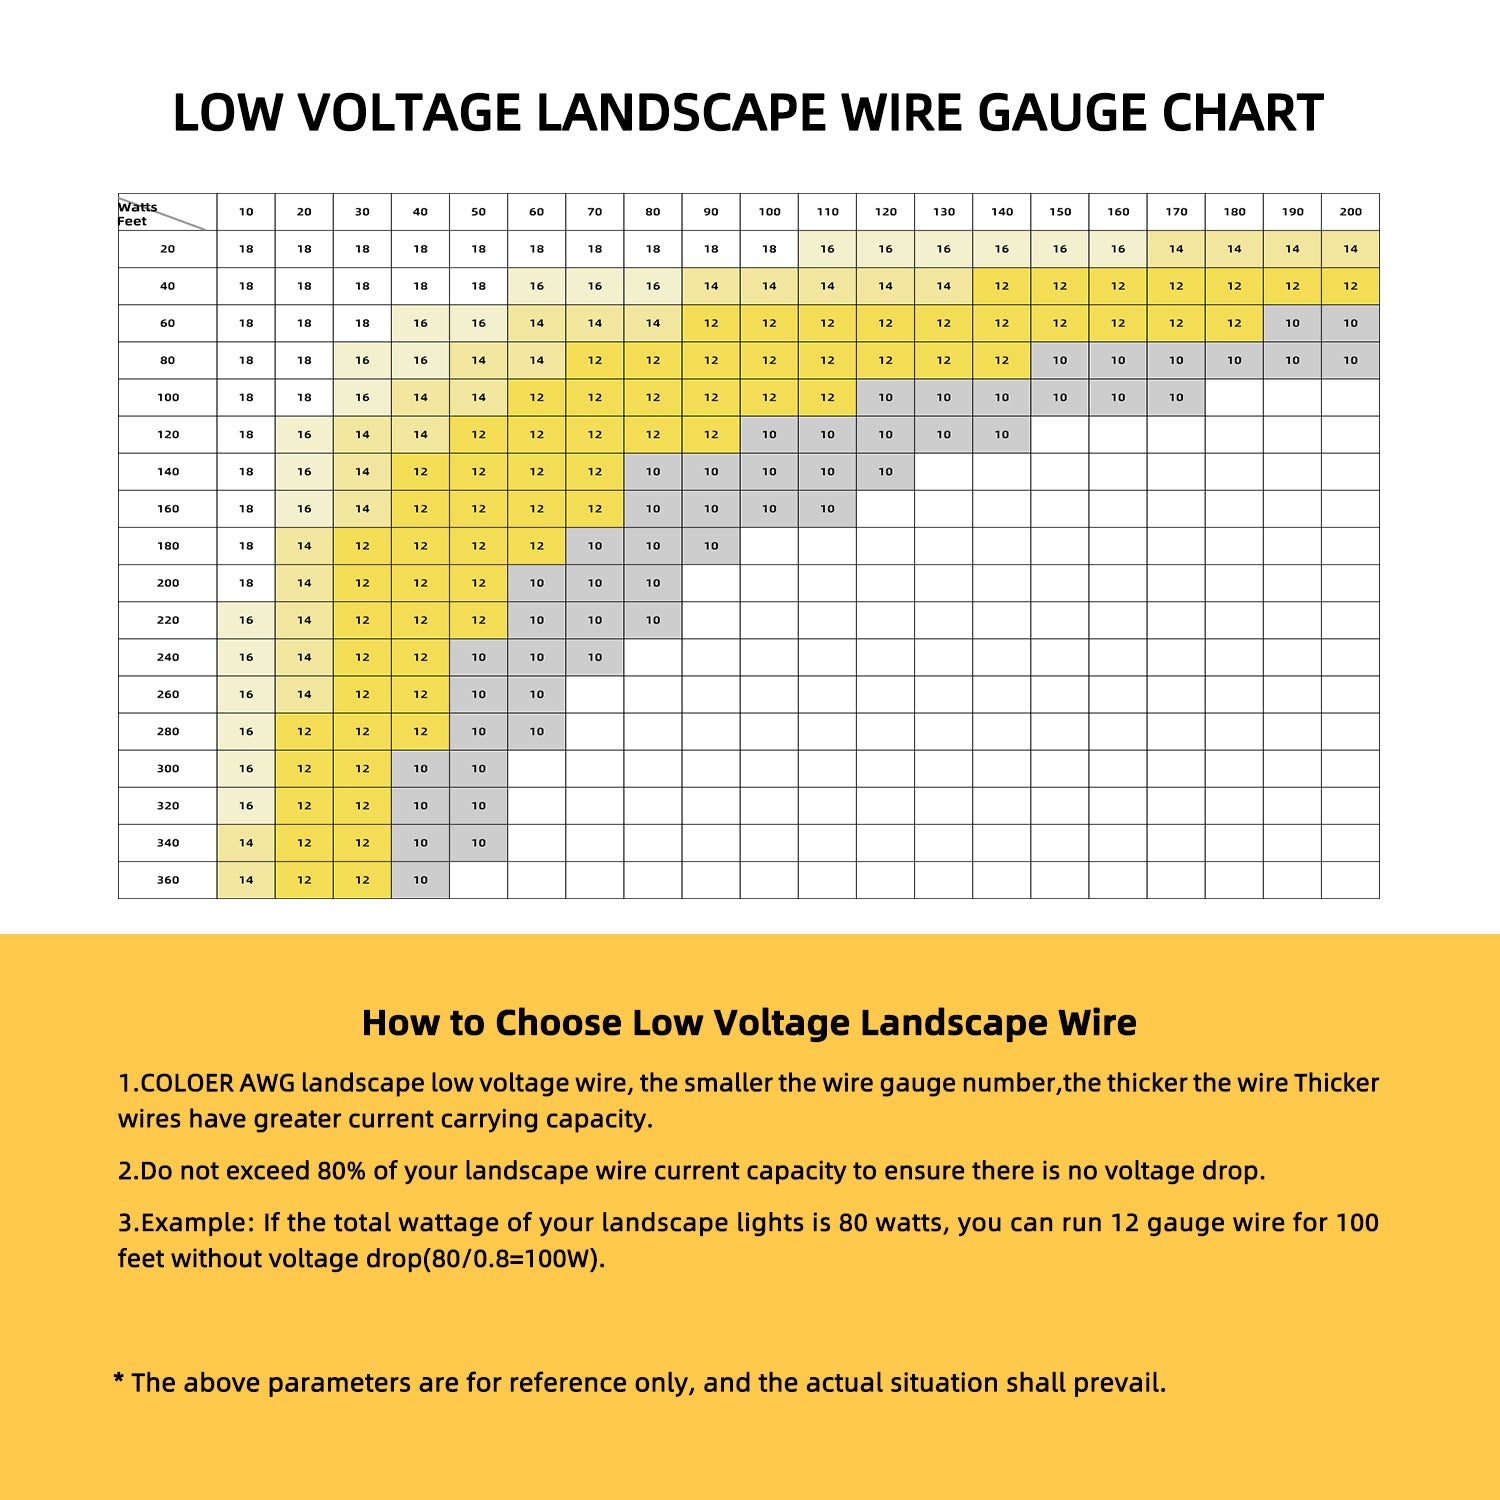 Low Voltage Landscape Wire Gauge Chart by COLOER with instructions on choosing the appropriate wire gauge based on wattage and distance.